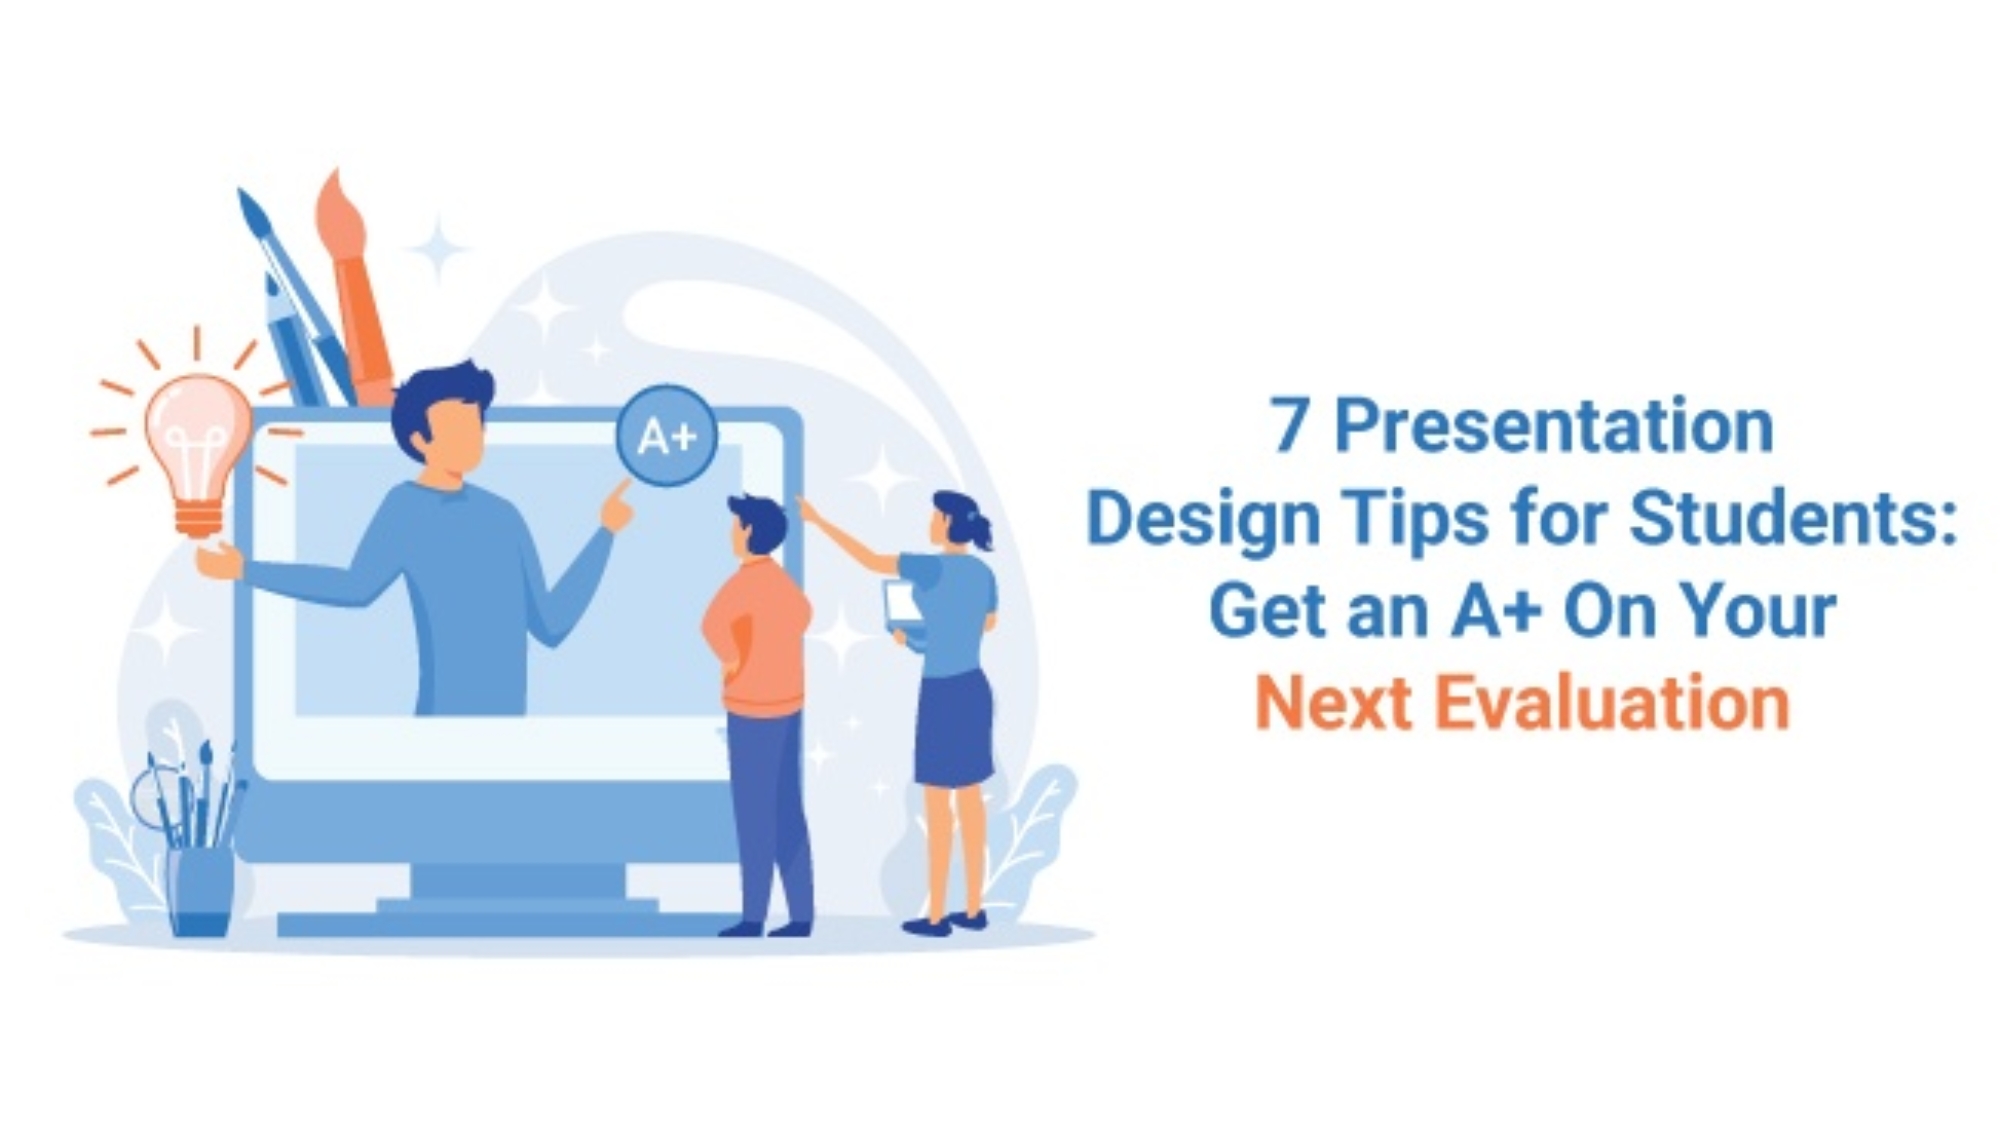 7-Presentation-Design-Tips-for-Students-Get-an-A-On-Your-Next-Evaluation.jpg